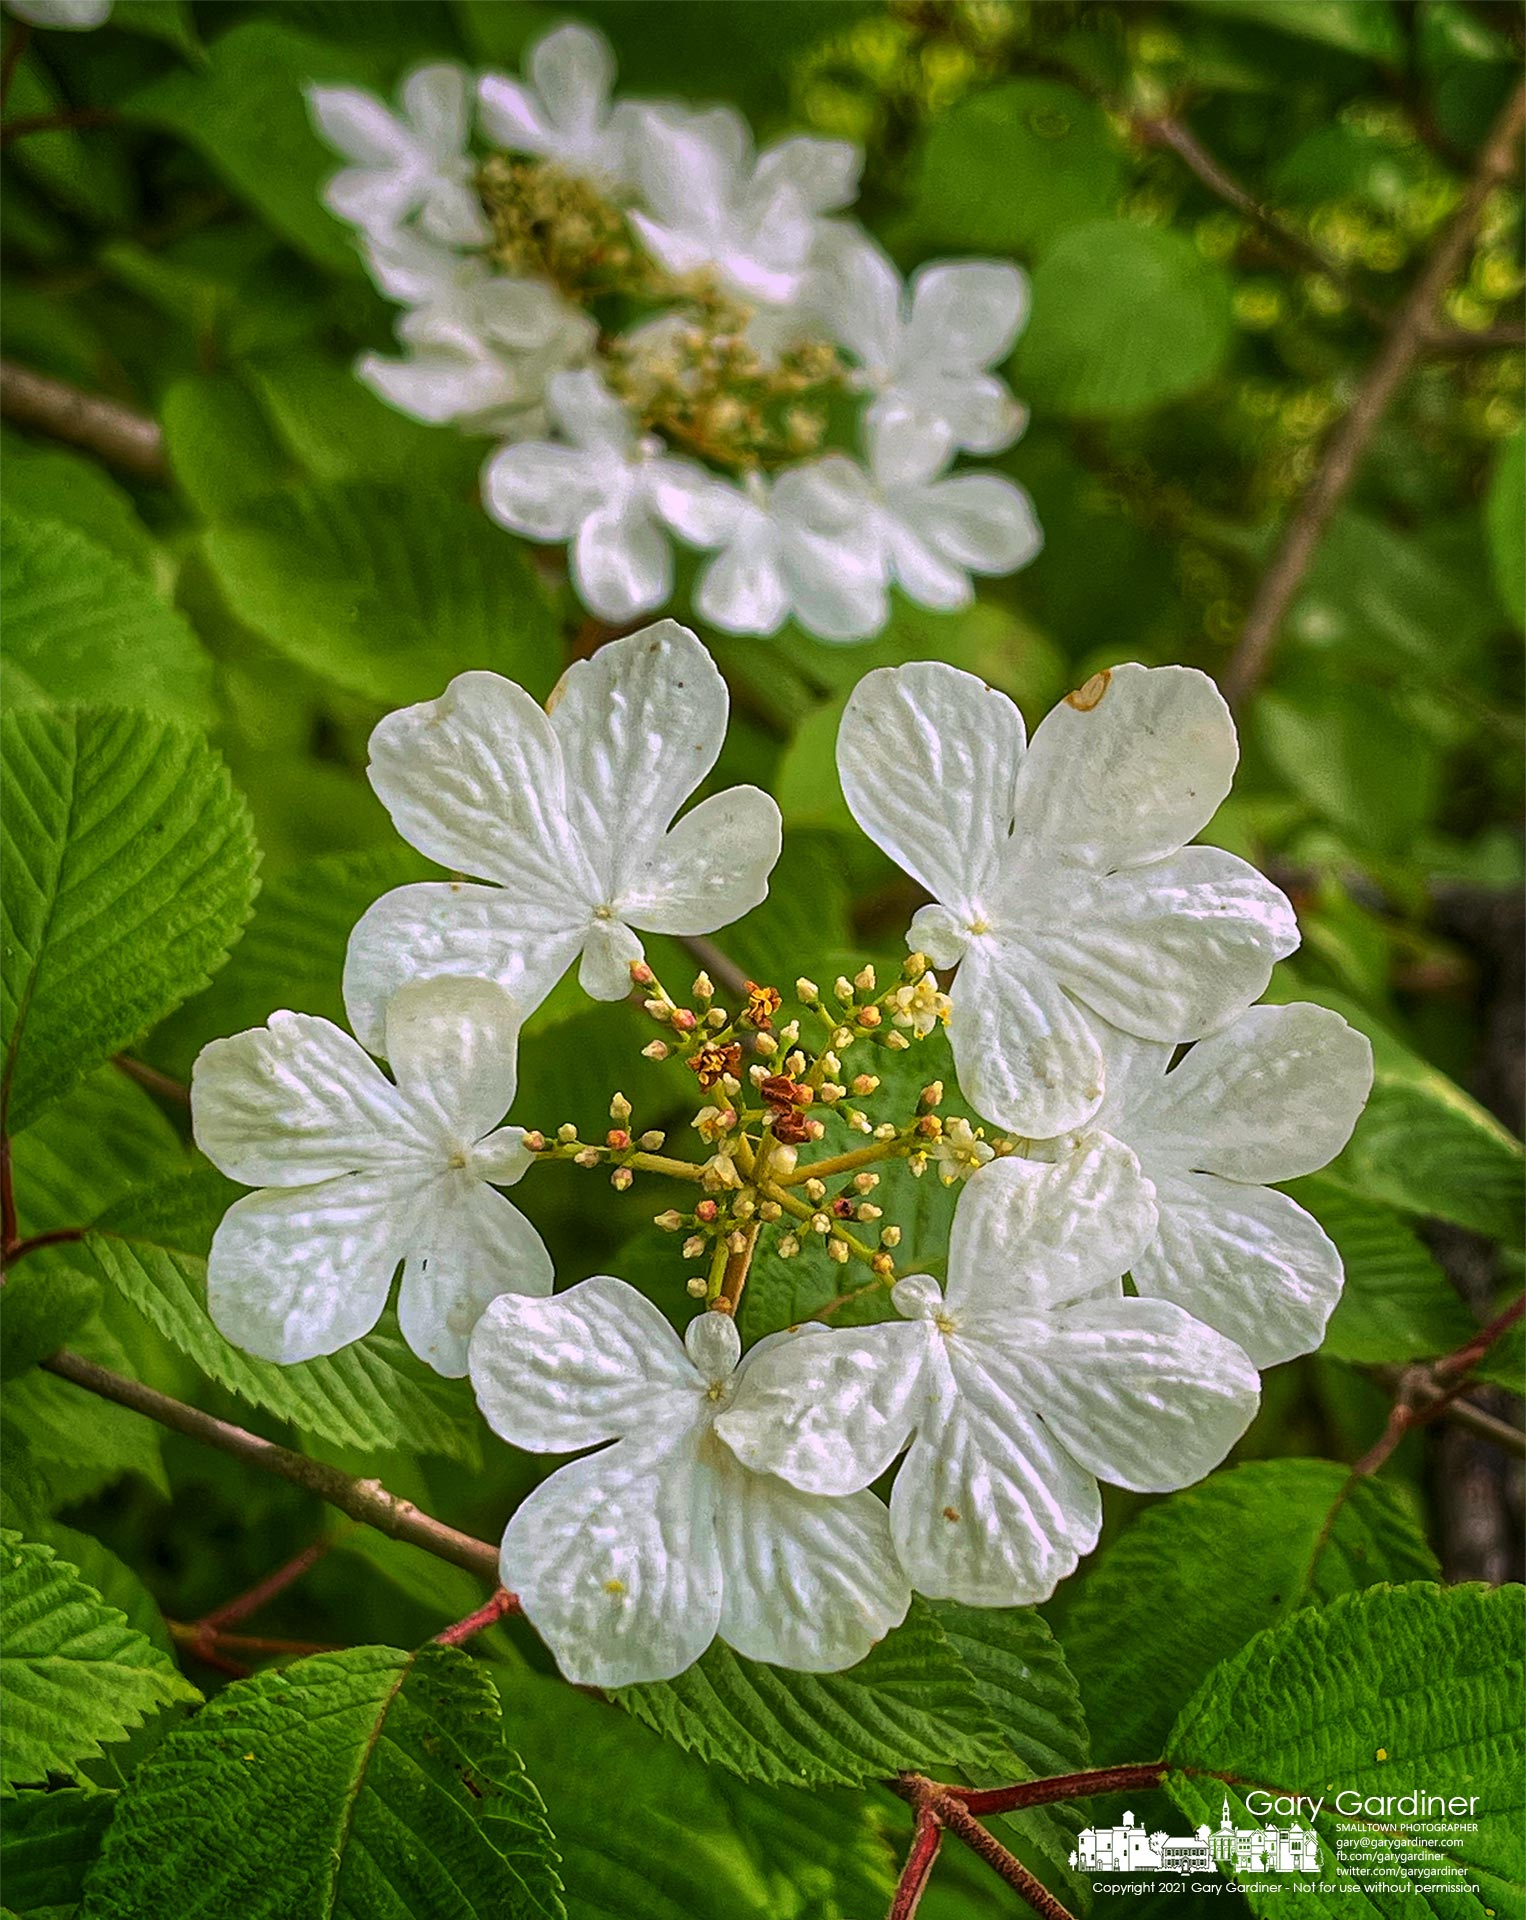 Viburnum blossoms grace the edge of the path leading to the wetlands at Boyer Nature Preserve in Westerville. My Final Photo for May 20, 2021.